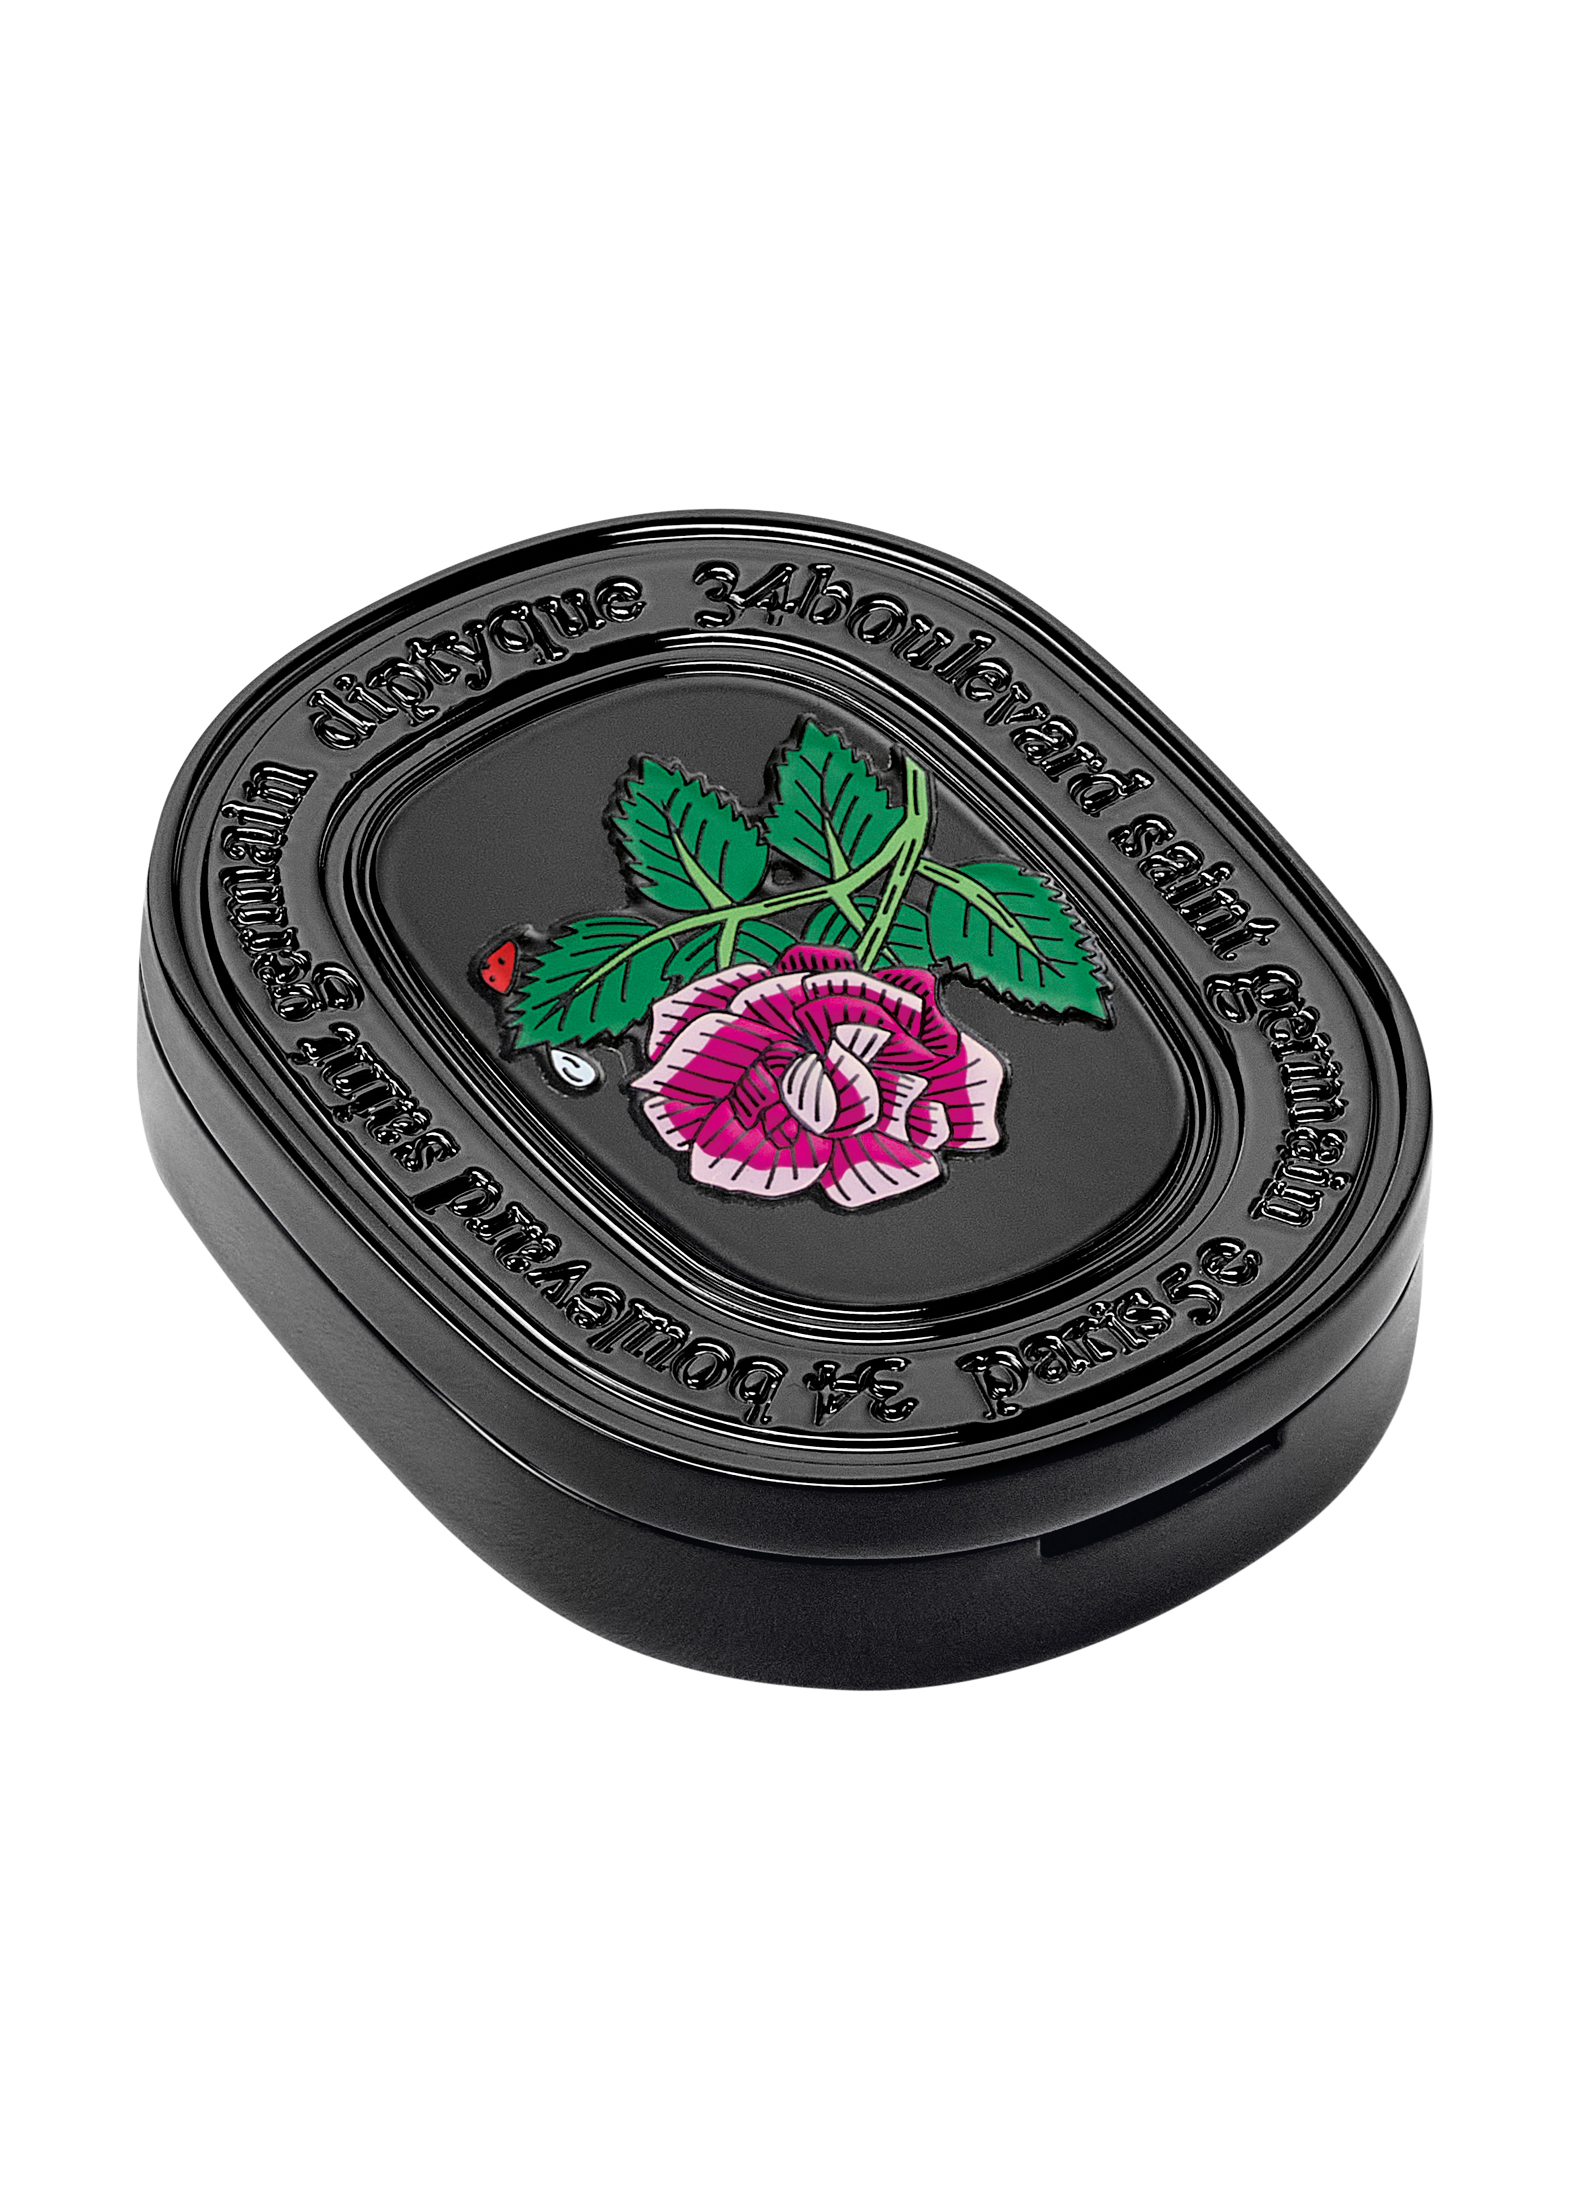 Solid perfume Eau Rose 3,6g / 0,13 oz - refillable & new dec image number 1